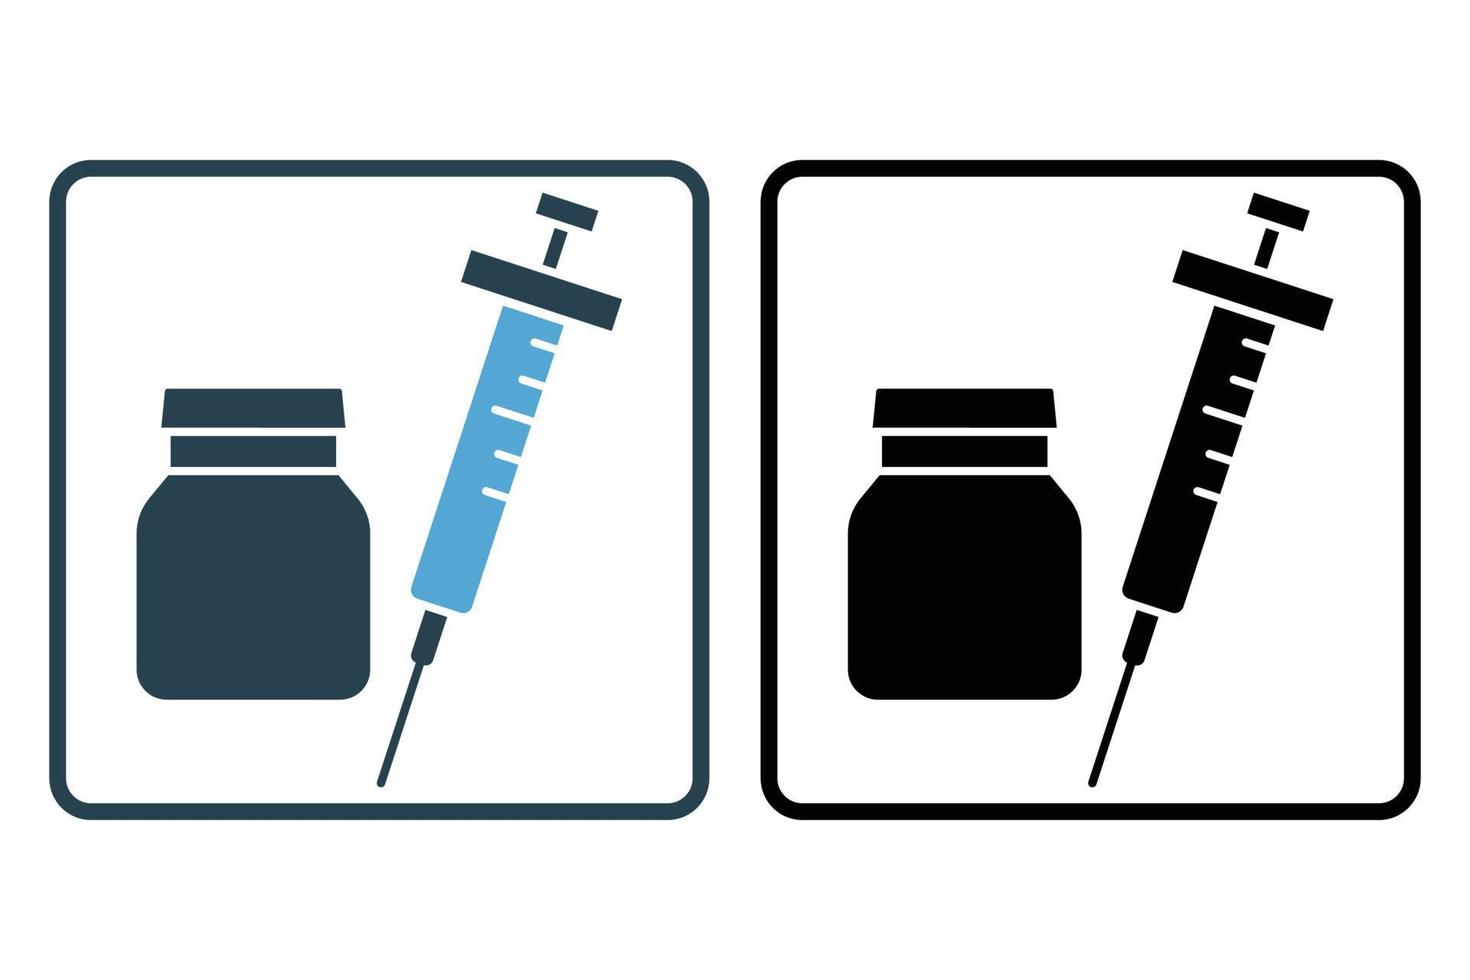 Vaccine icon illustration. icon related to baby care. Solid icon style. Simple vector design editable